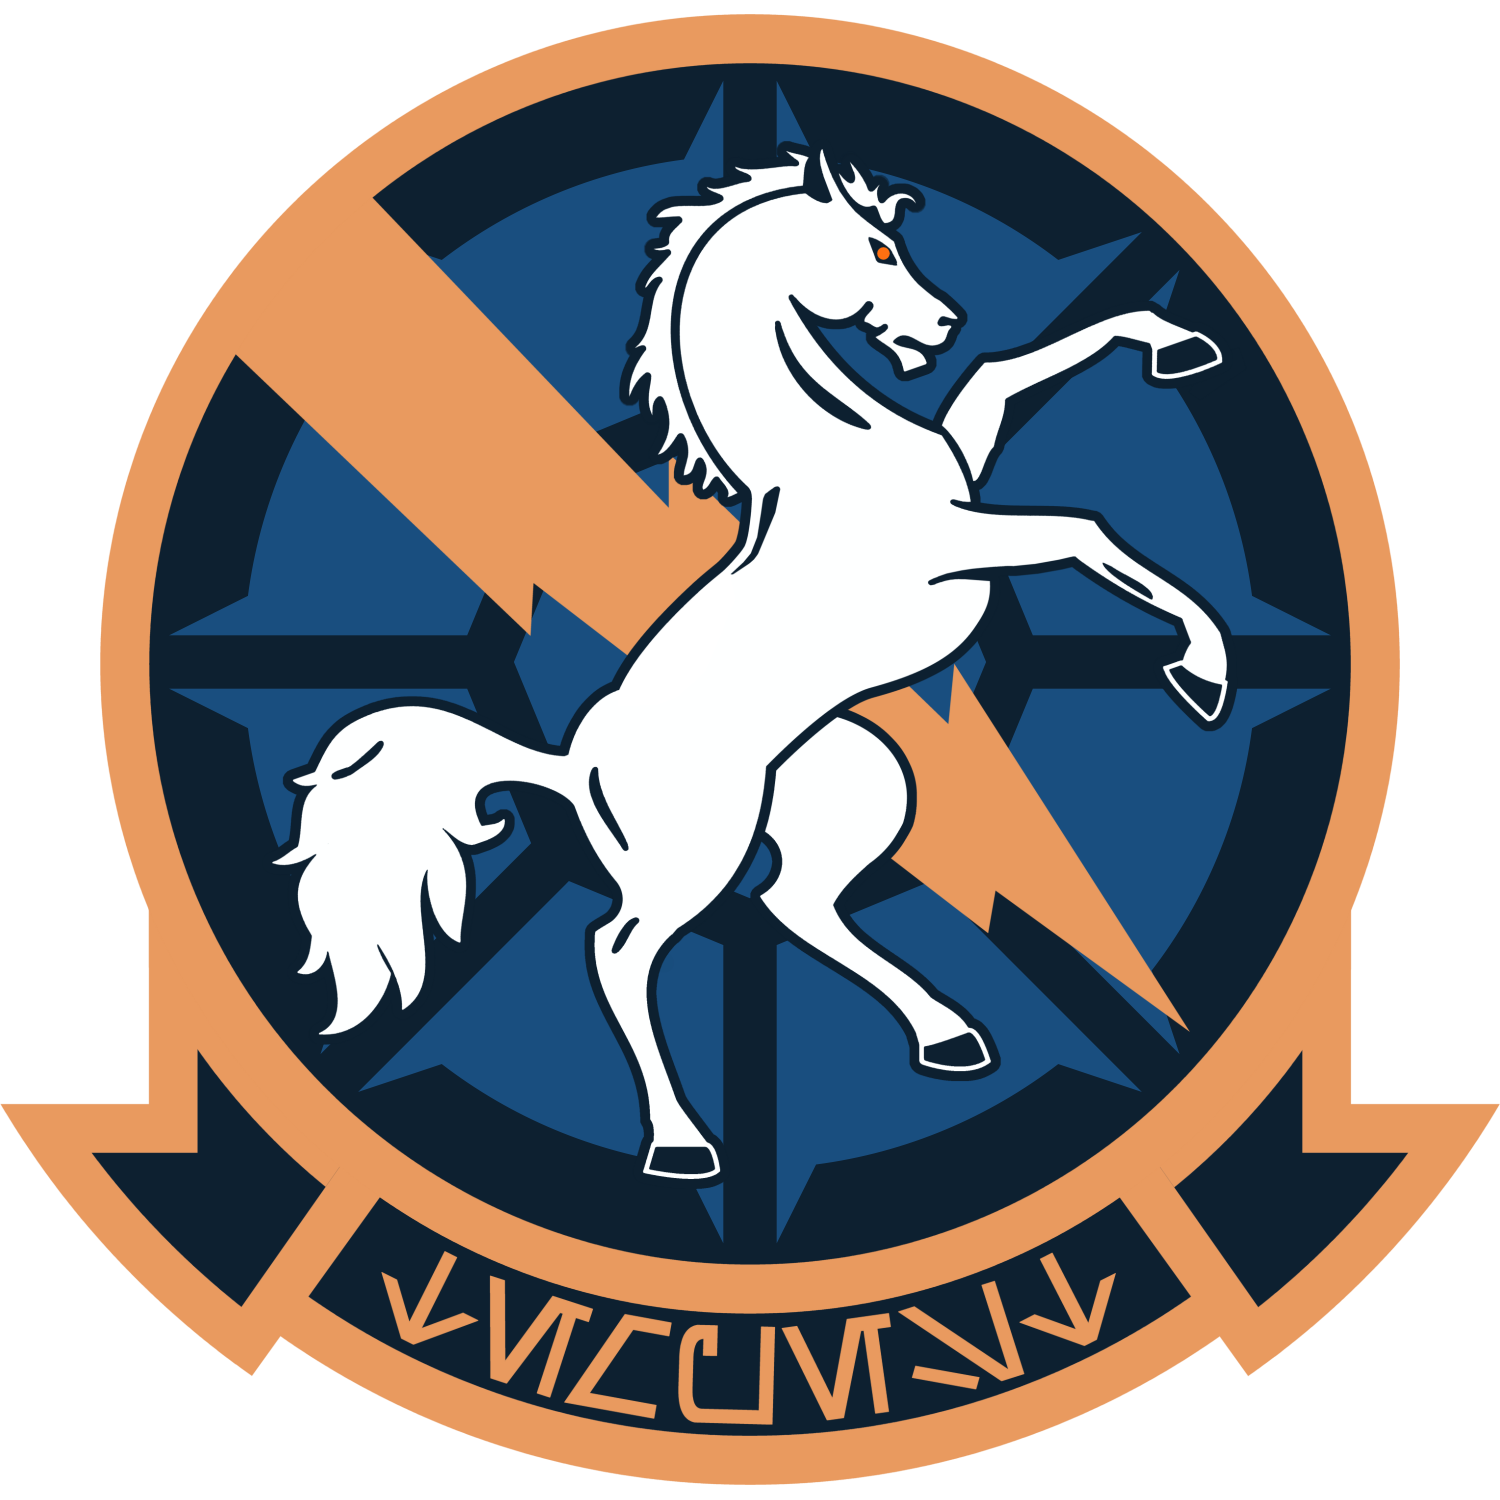 Tempest Squadron logo, featuring a horse rearing in front of a lightning bolt.